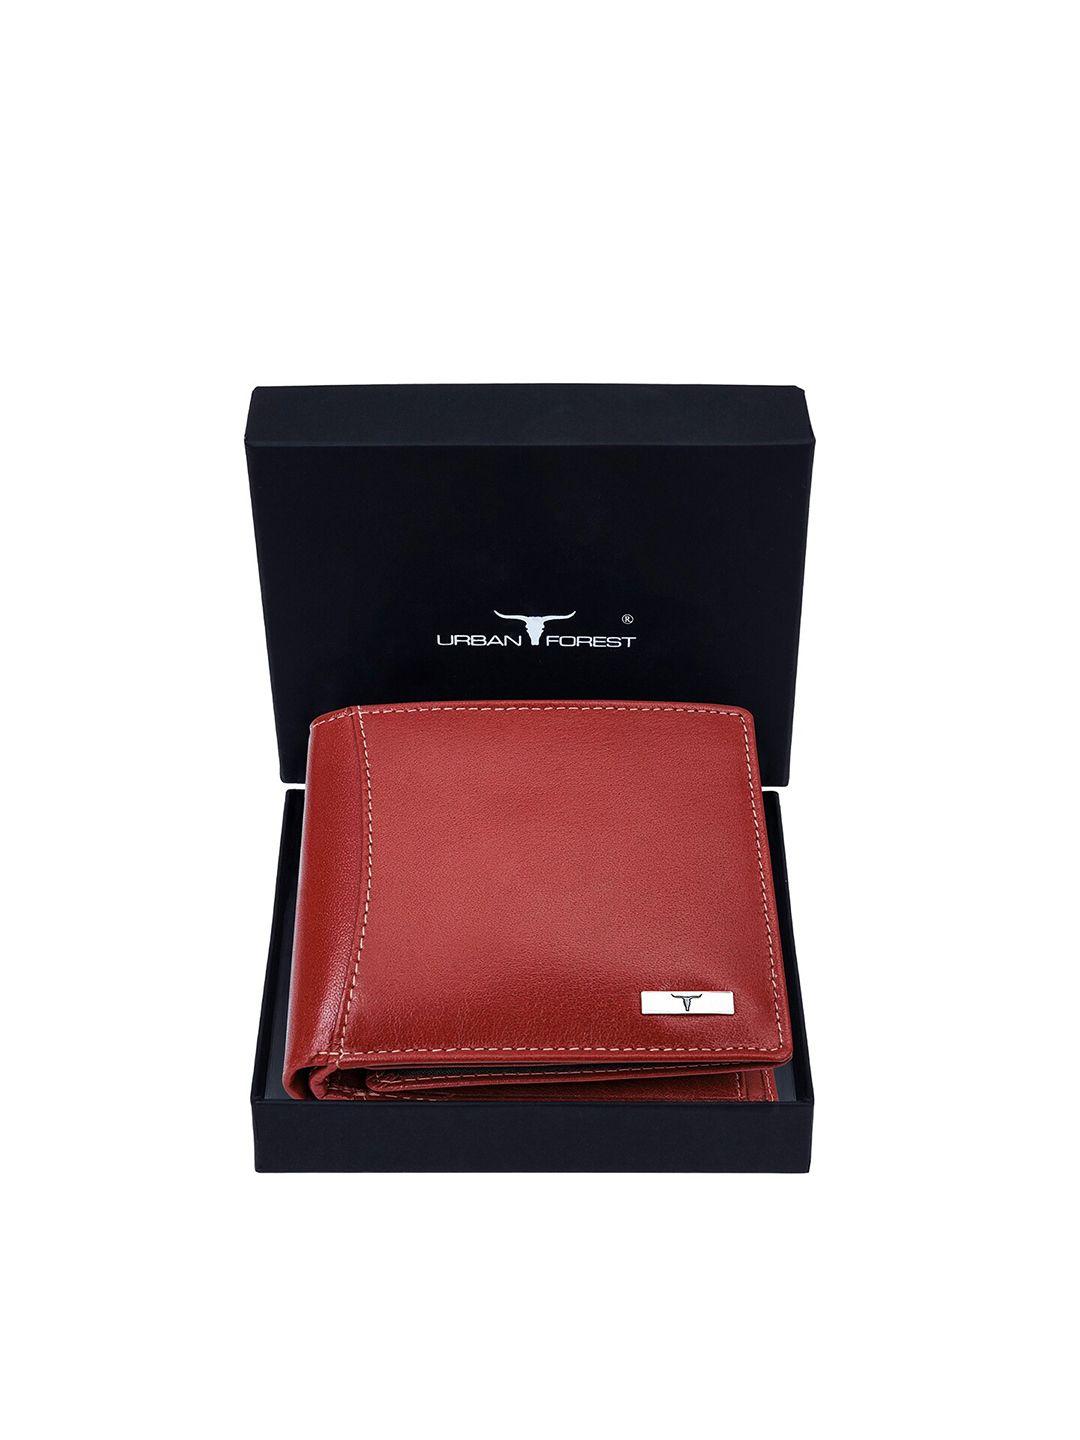 urban forest leather two fold wallet